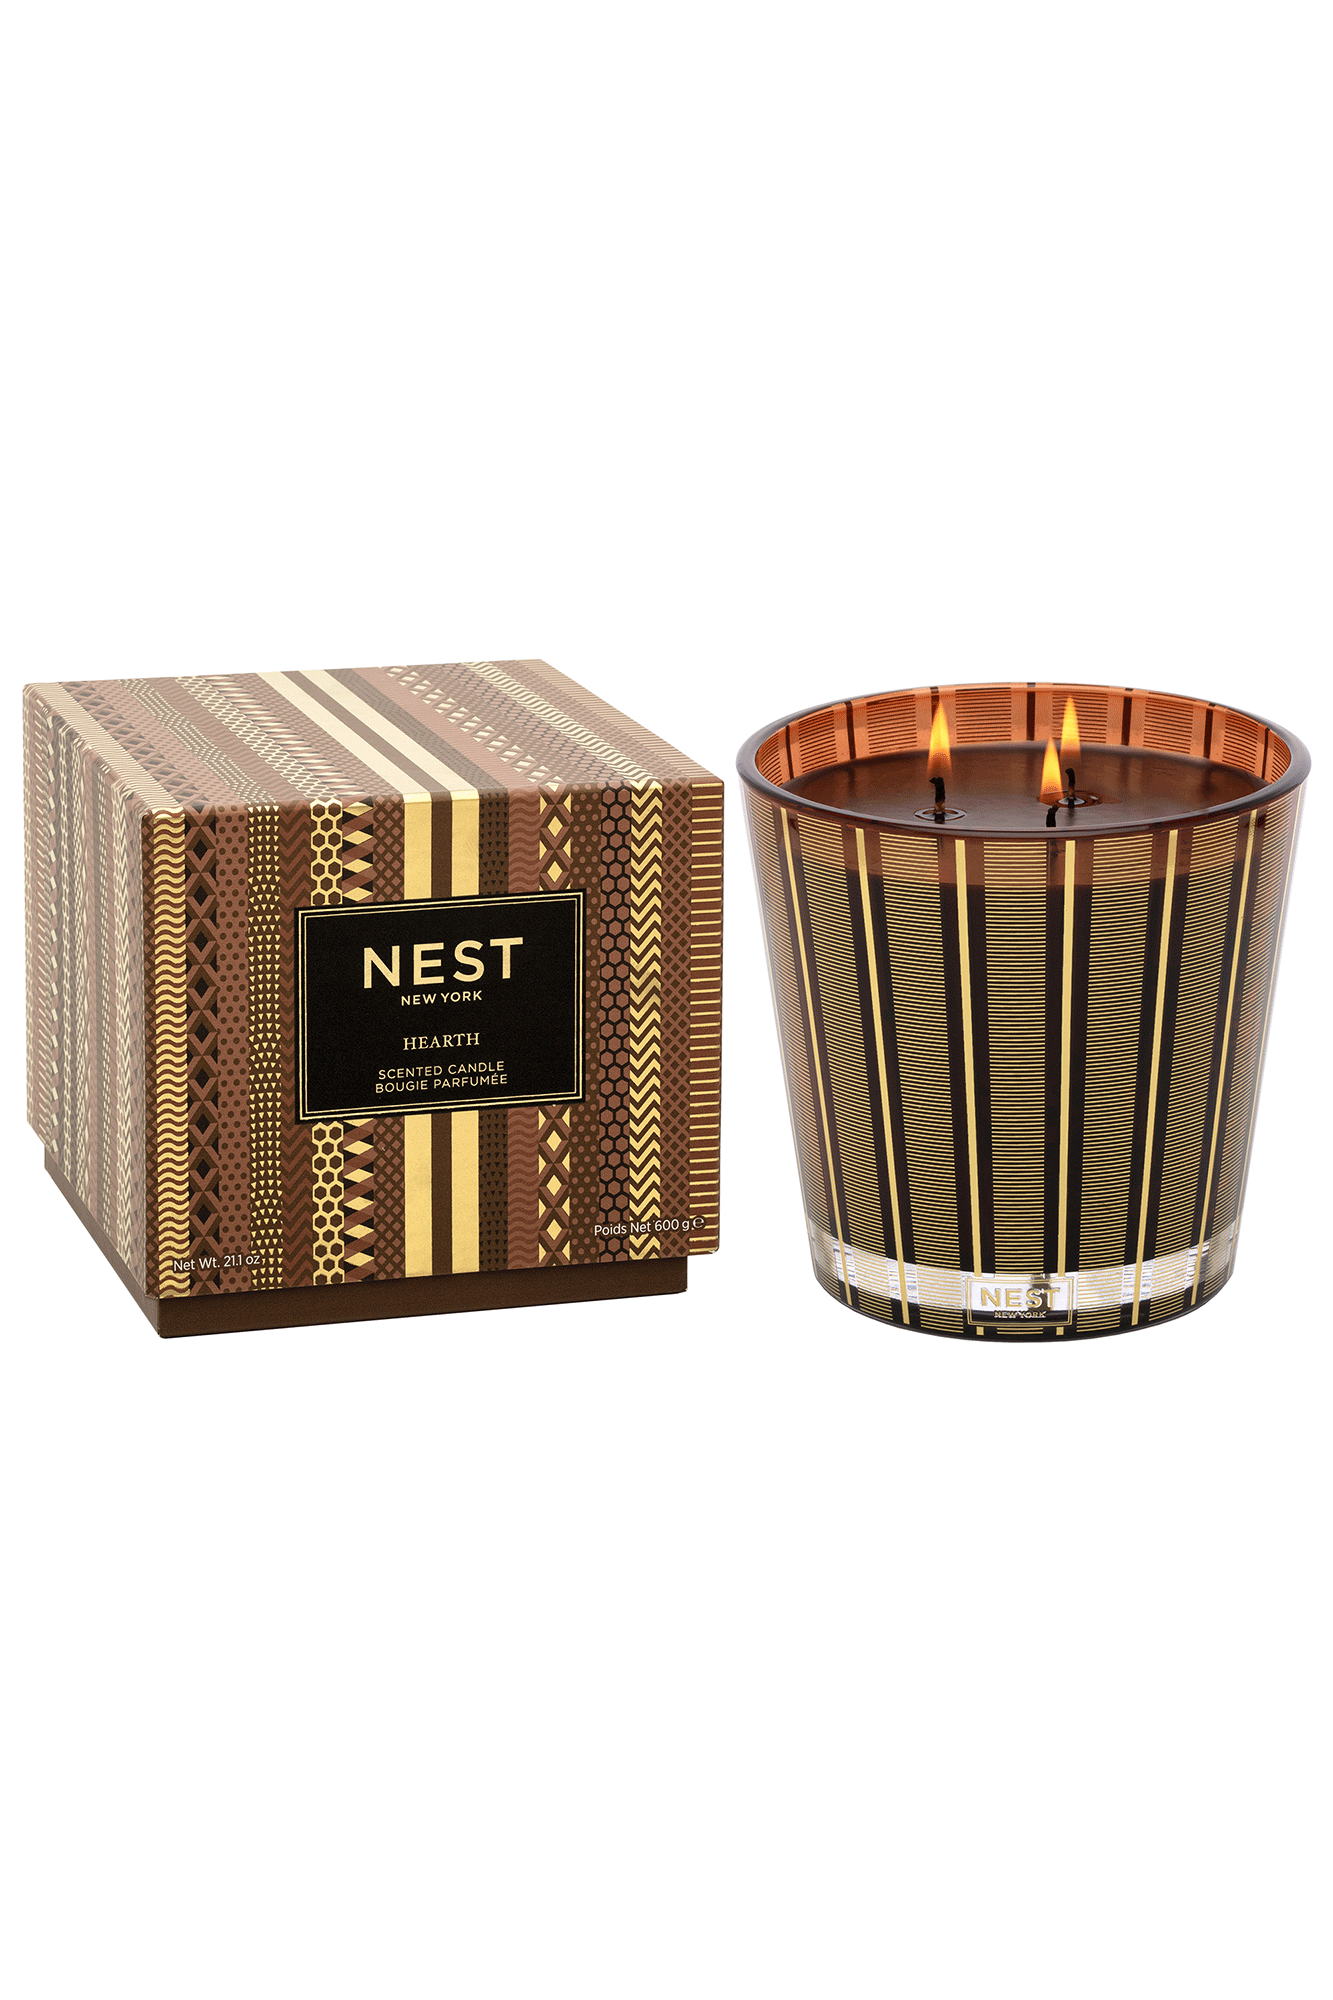 Experience the inviting ambiance of a cozy fireplace in your home with the Hearth 3 Wick Candle from Nest. An exquisite fragrance featuring oud wood, frankincense, and smoky embers creates a warm and inviting atmosphere. Perfect for adding a cozy touch to any evening.